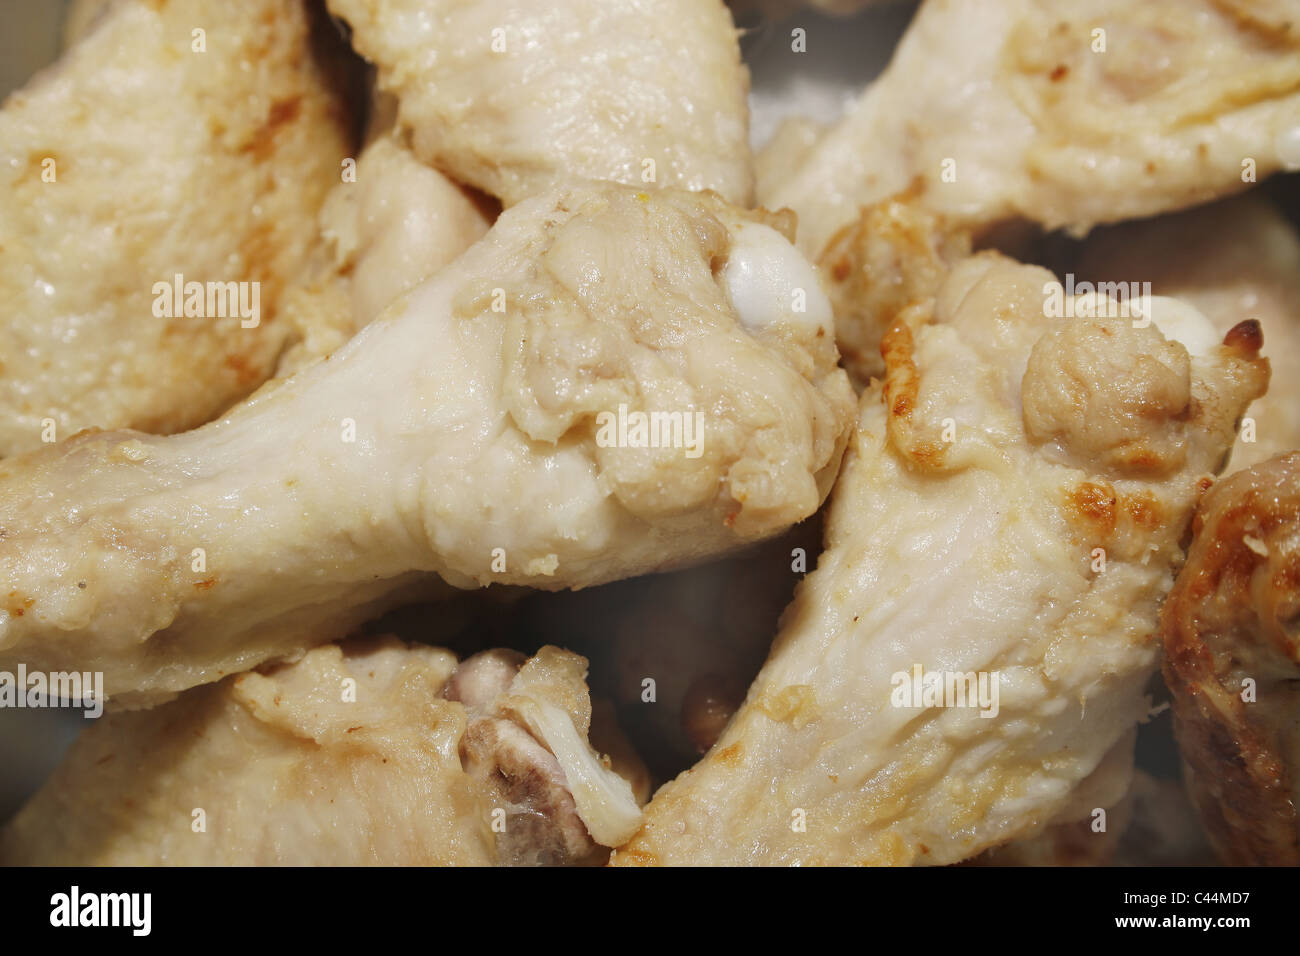 close up image of raw chicken wings Stock Photo